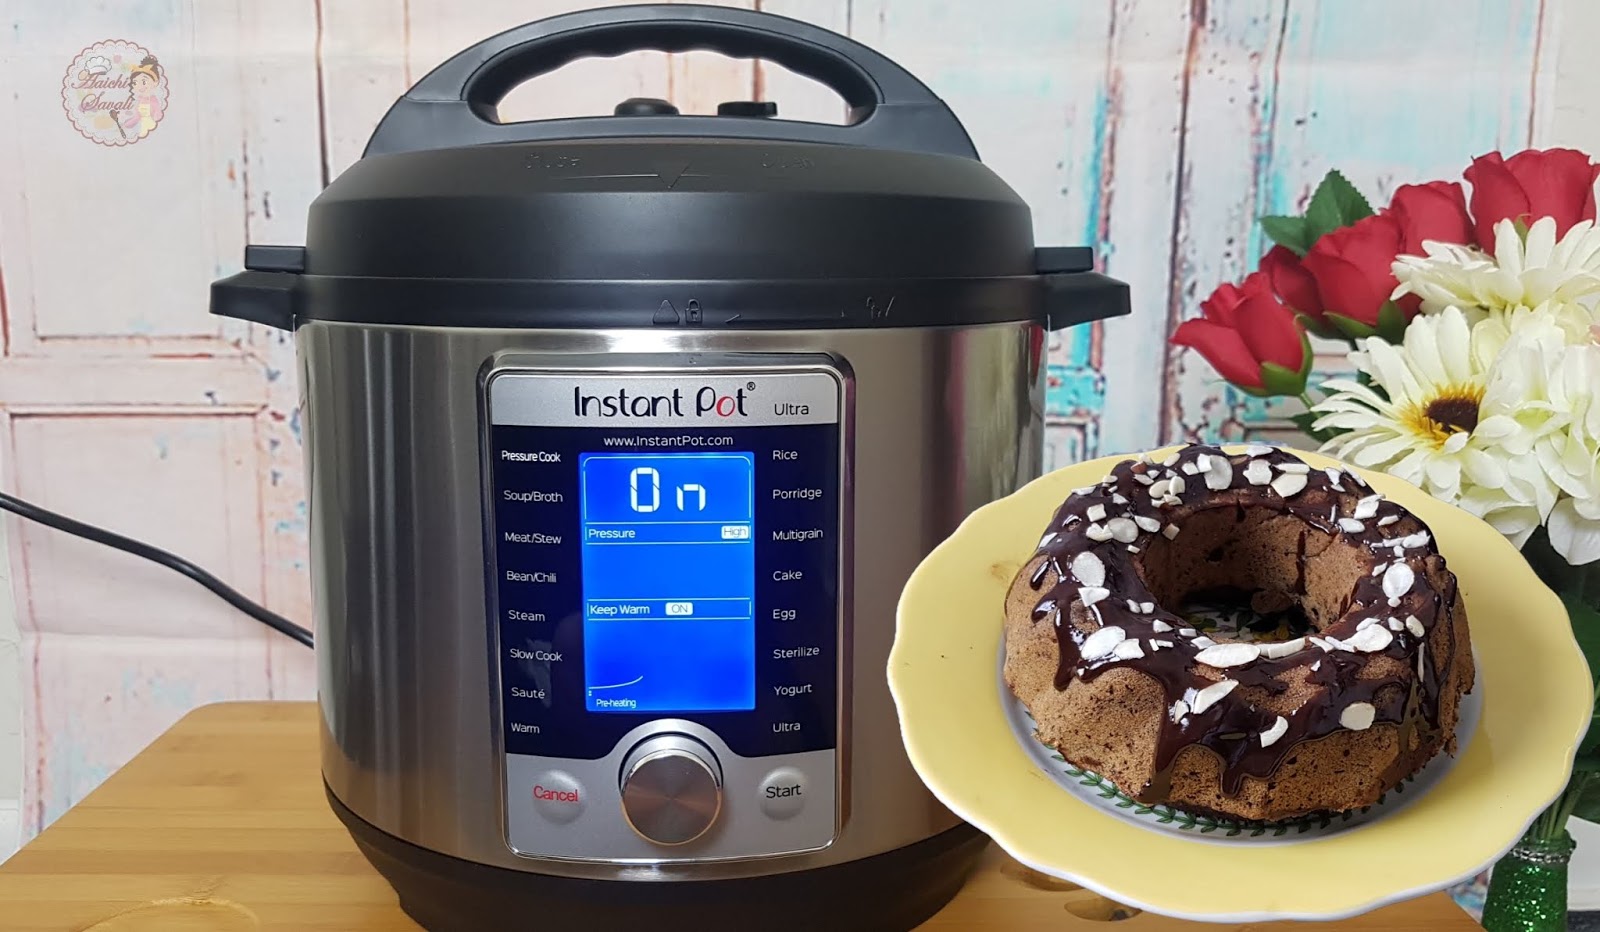 Instant Pot Ultra60 10 in 1 Multi Use Programmable Pressure Cooker